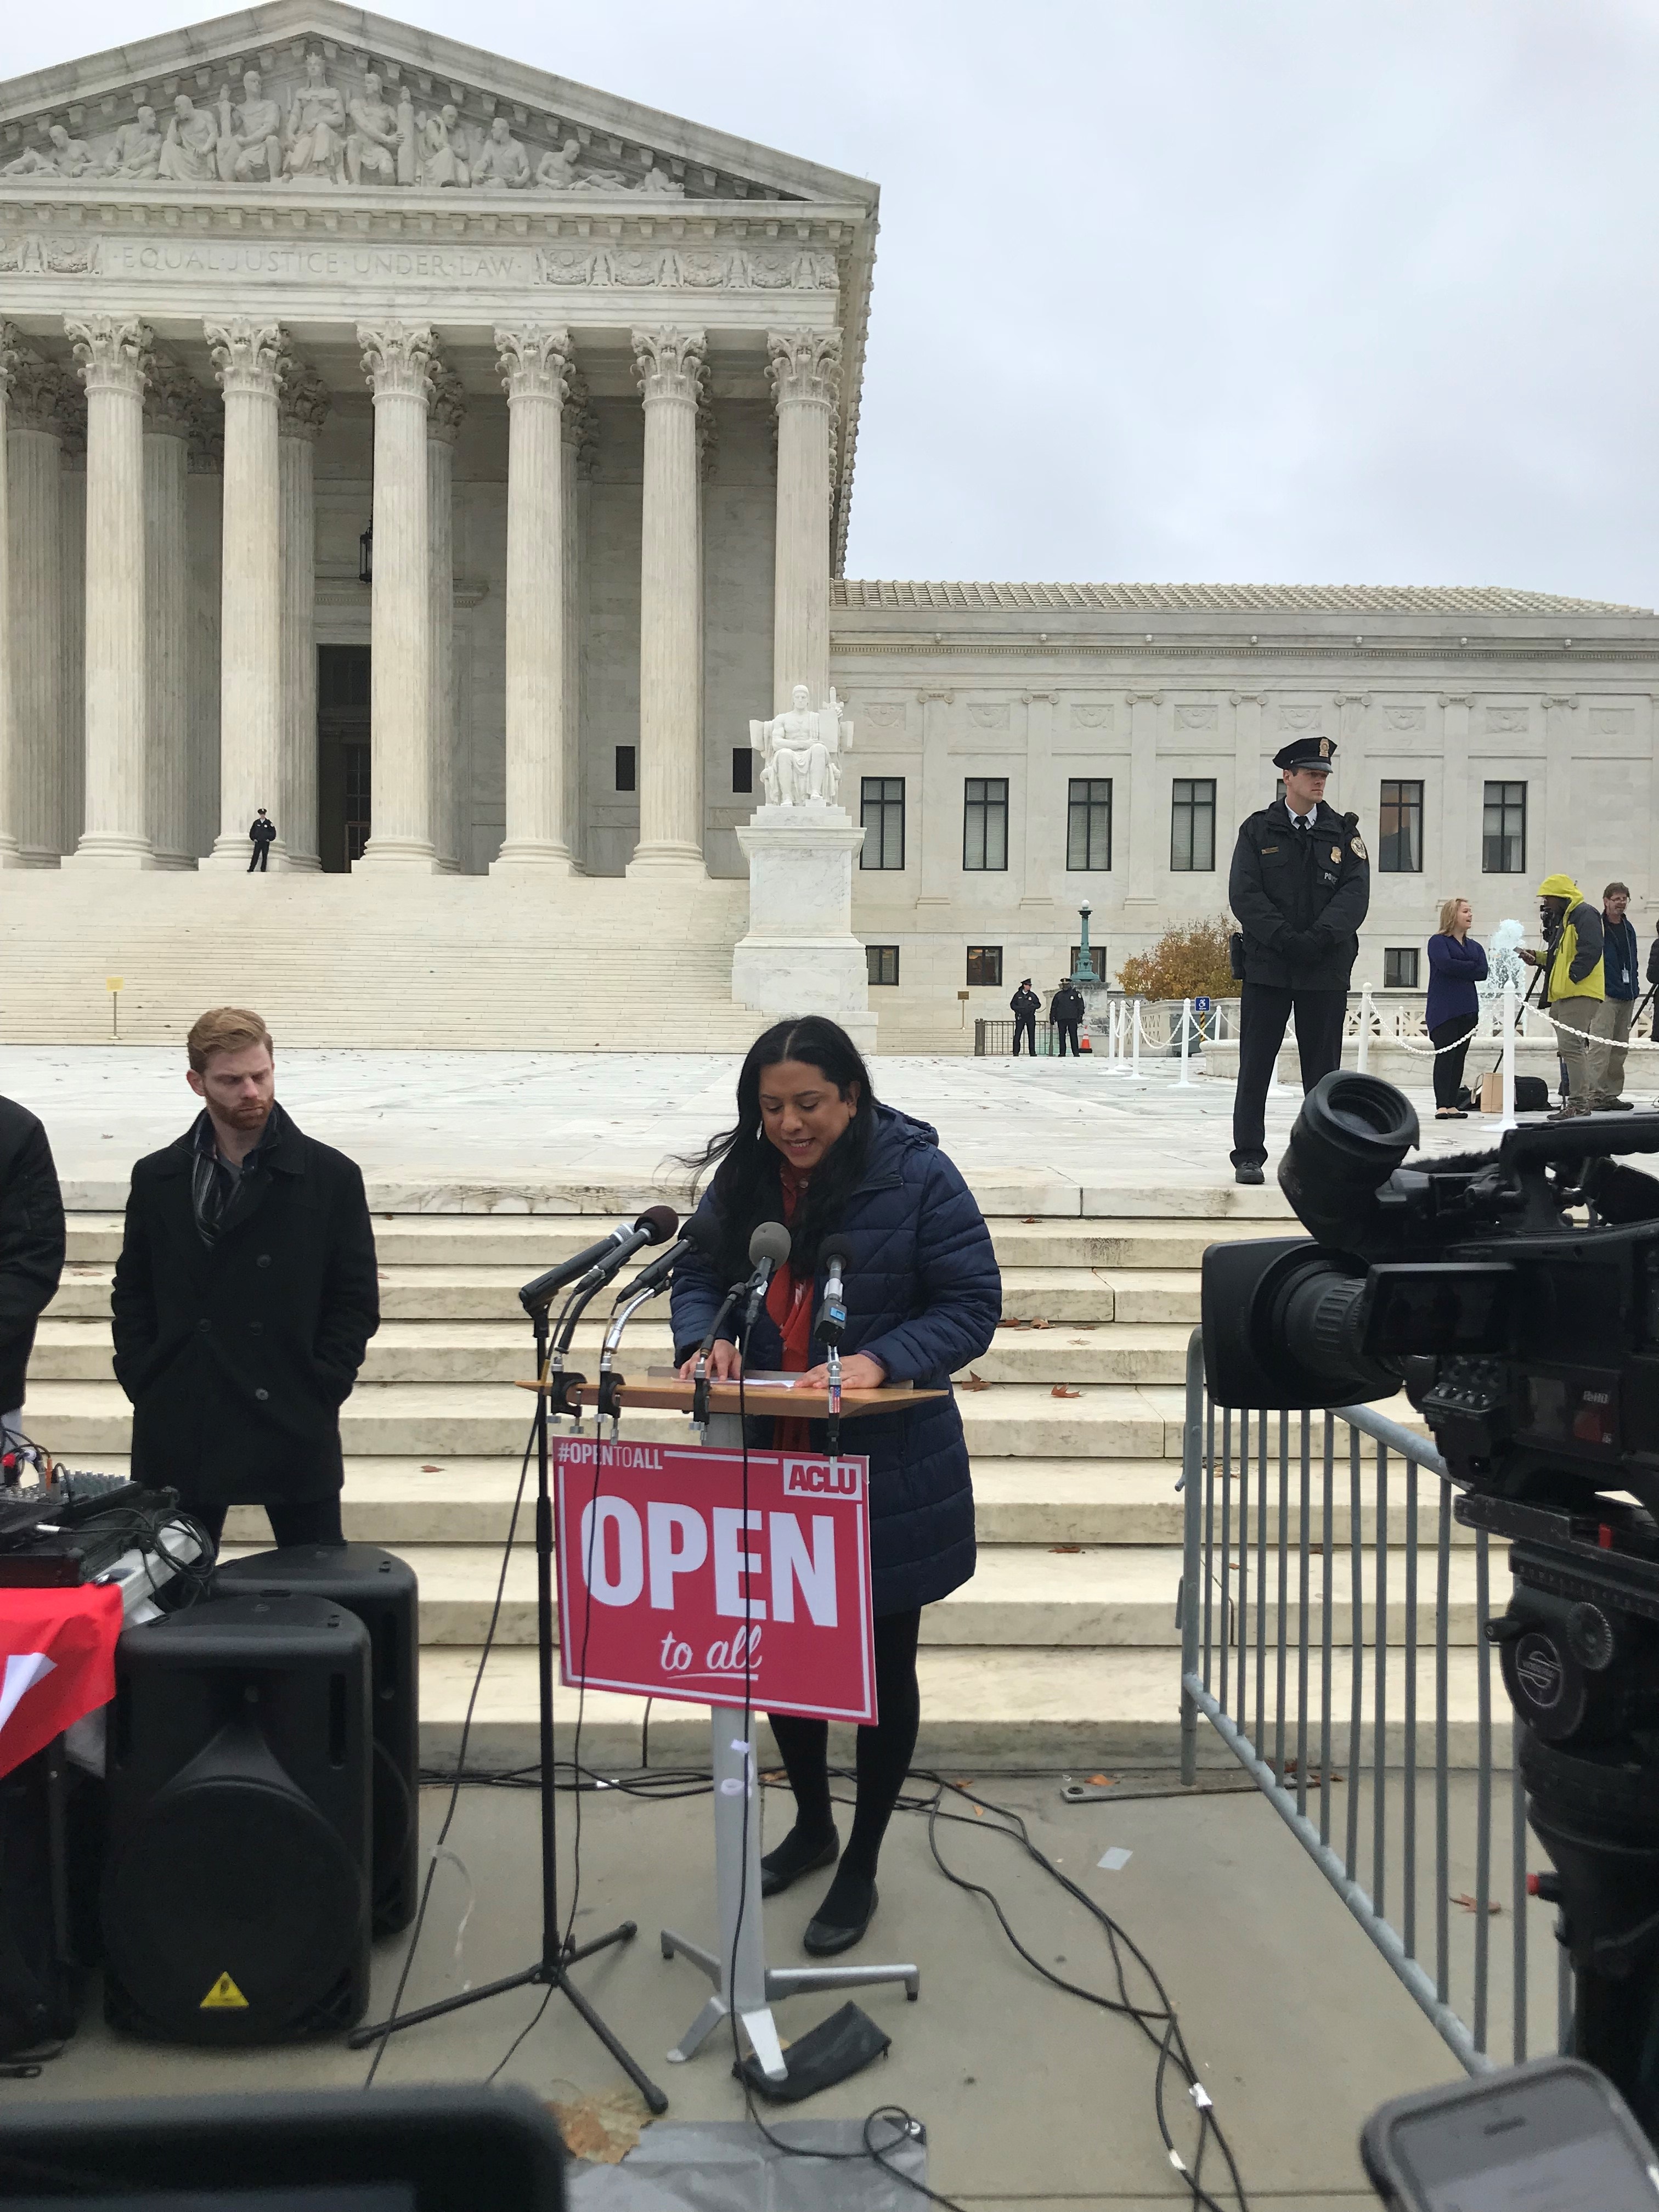 WATCH: TLC’s Isa Noyola speaks out against discrimination on Supreme Court steps